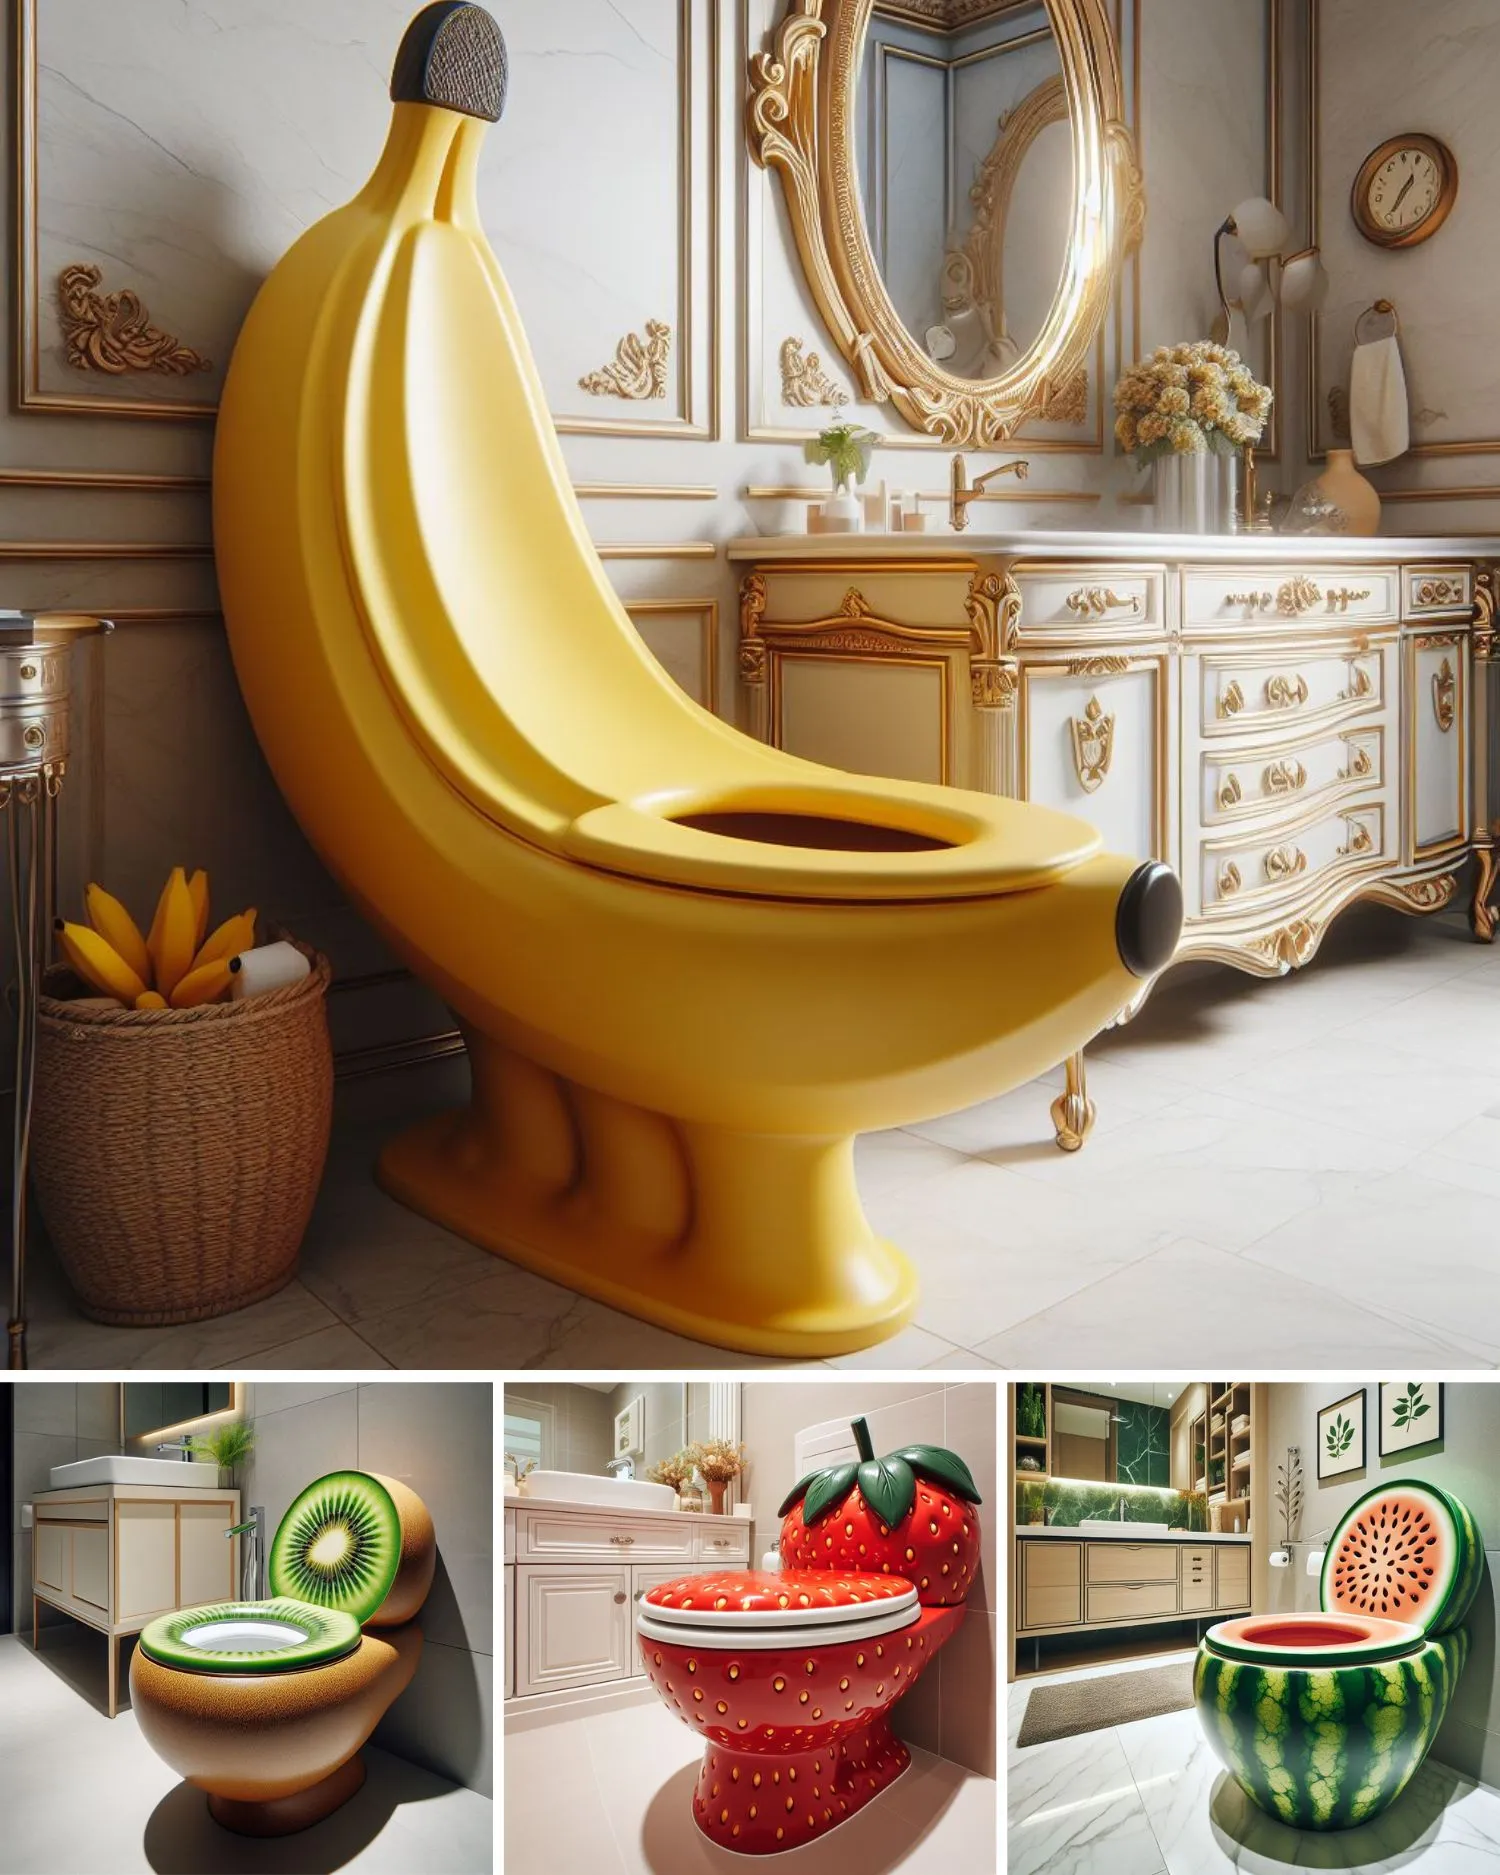 The Curious Case of the Fruit Shaped Toilet: Function Meets Fun in the Bathroom